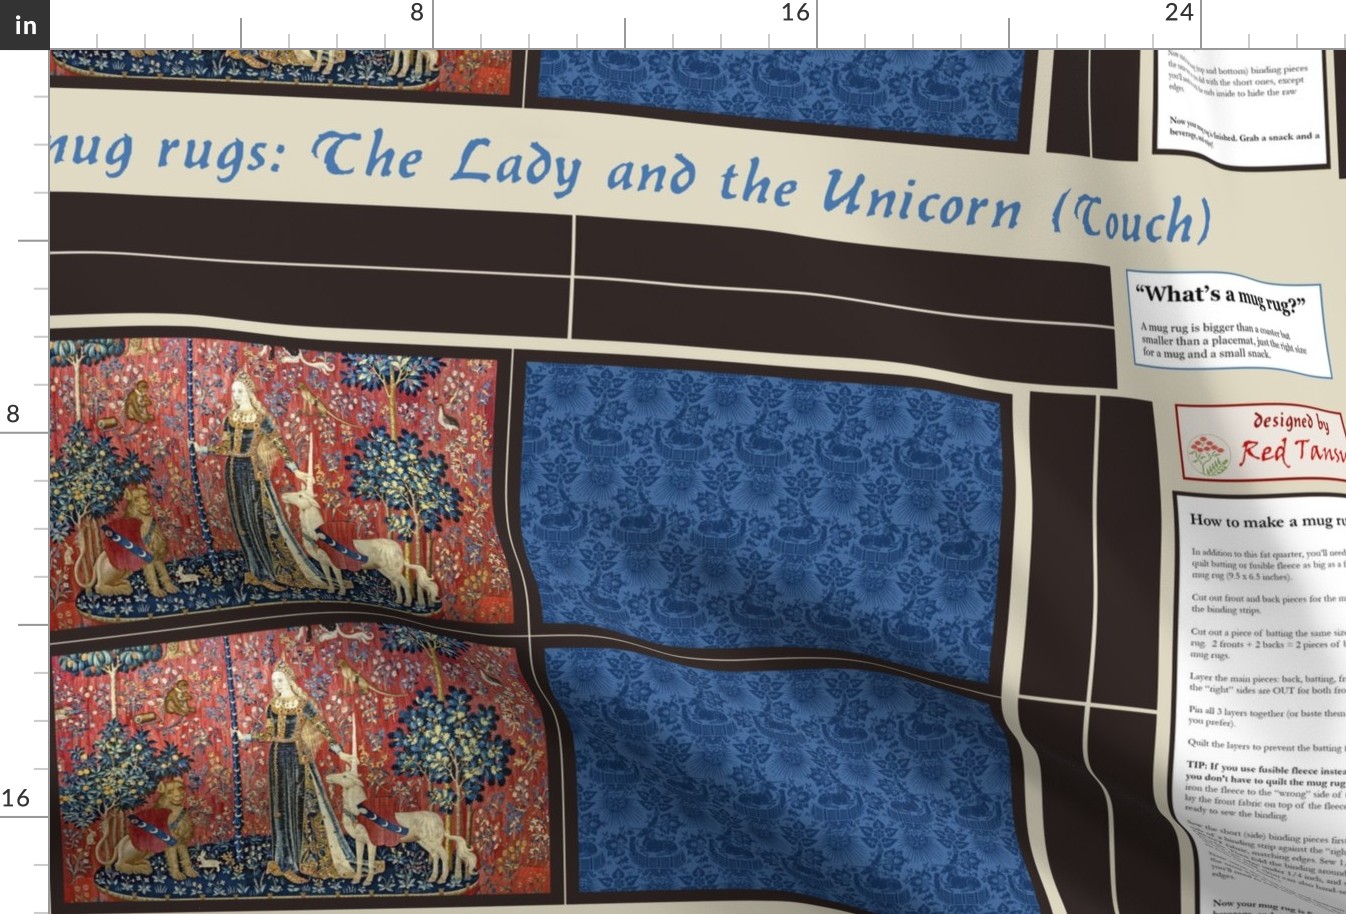 mug rugs: The Lady and the Unicorn (Touch)